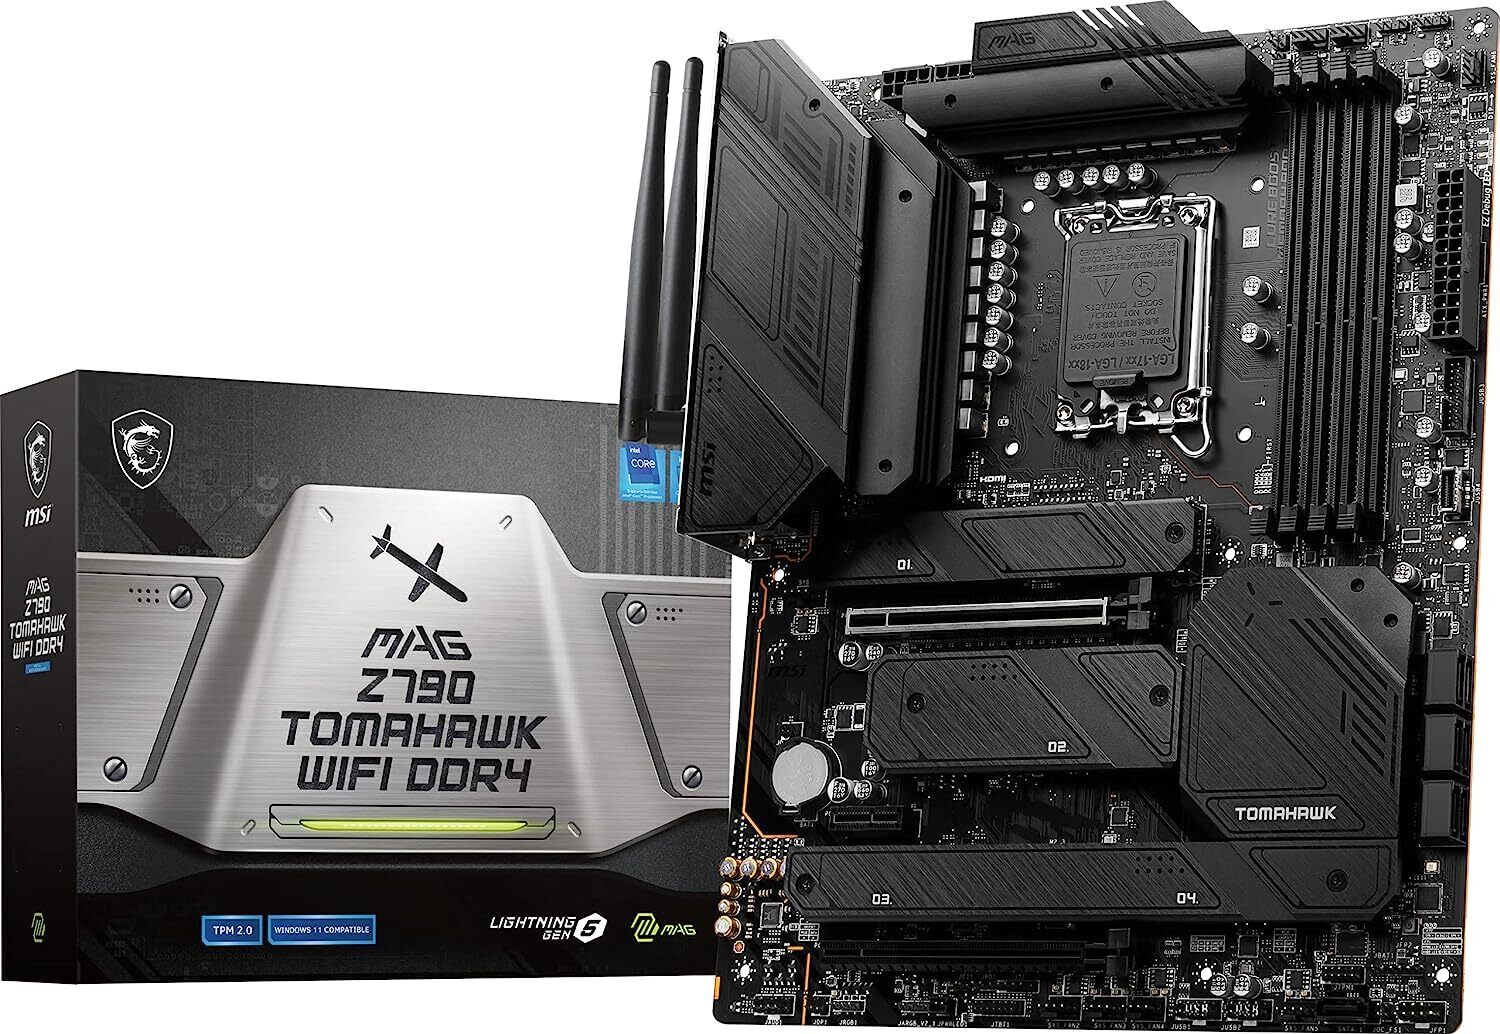 MSI MAG Z790 Tomahawk WiFi DDR4 Computer Gaming Motherboard, Intel Motherboards